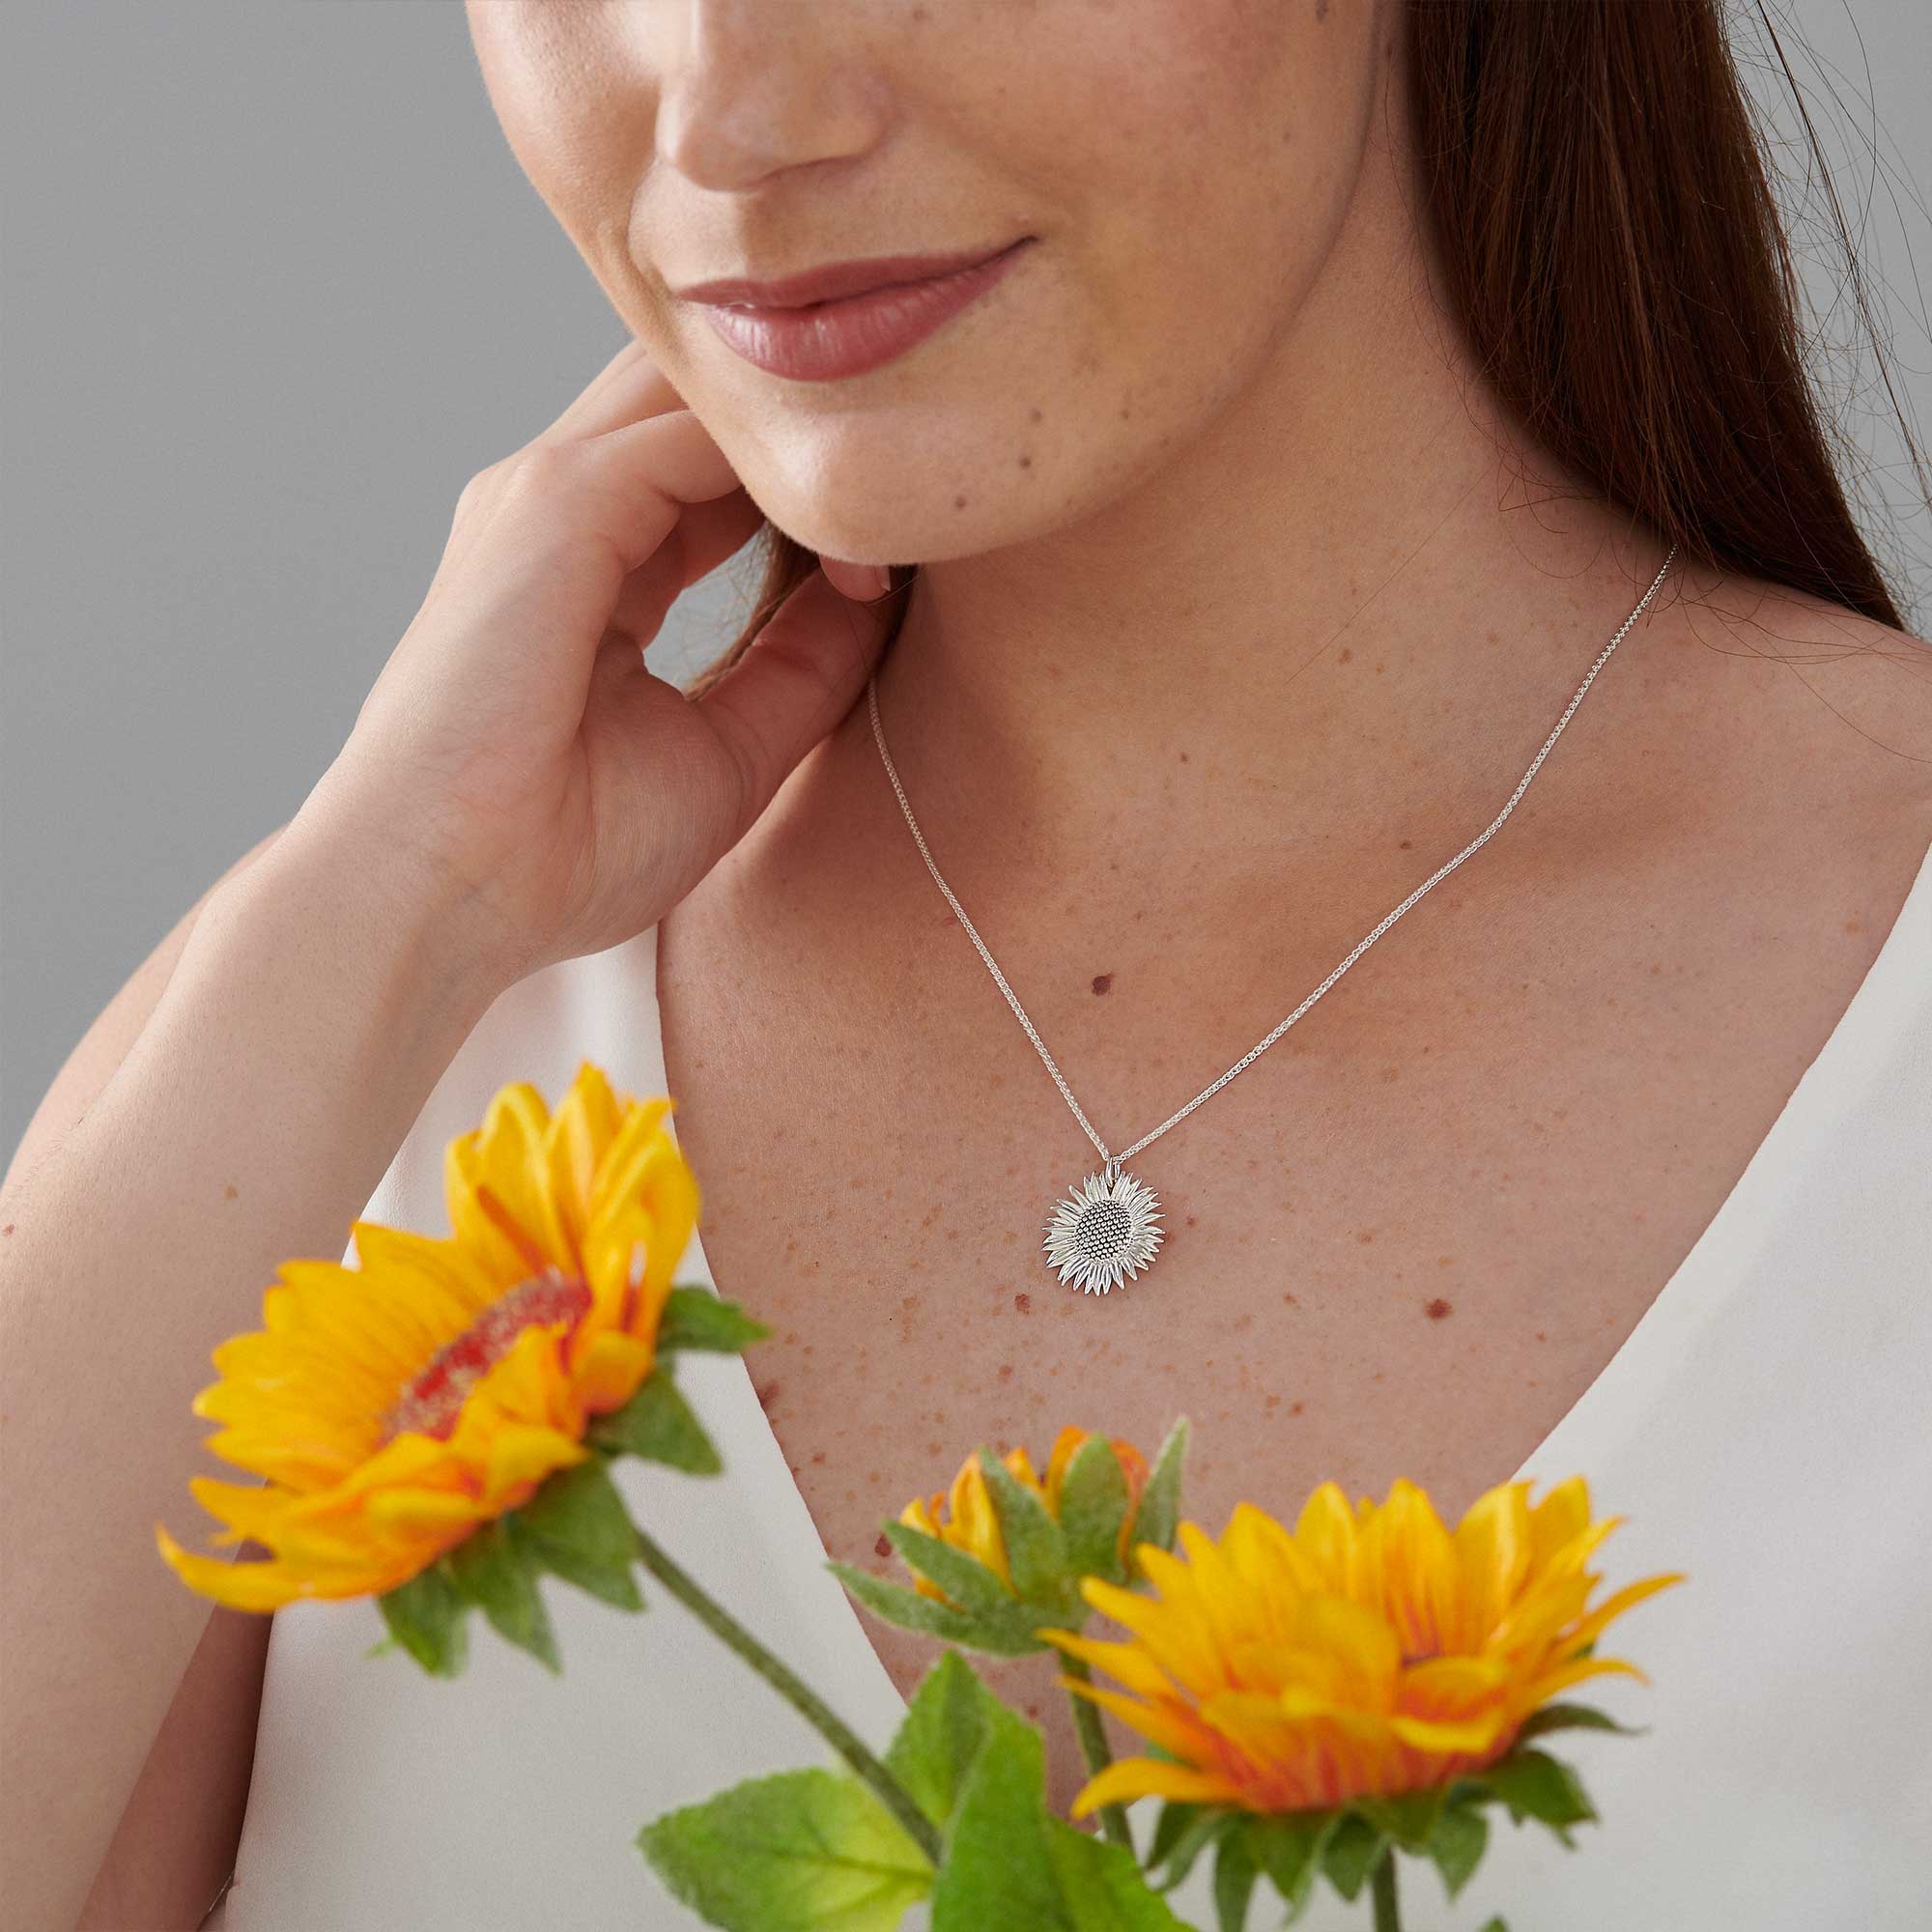 Sunflower Jewelry: A Radiant Expression of Adoration